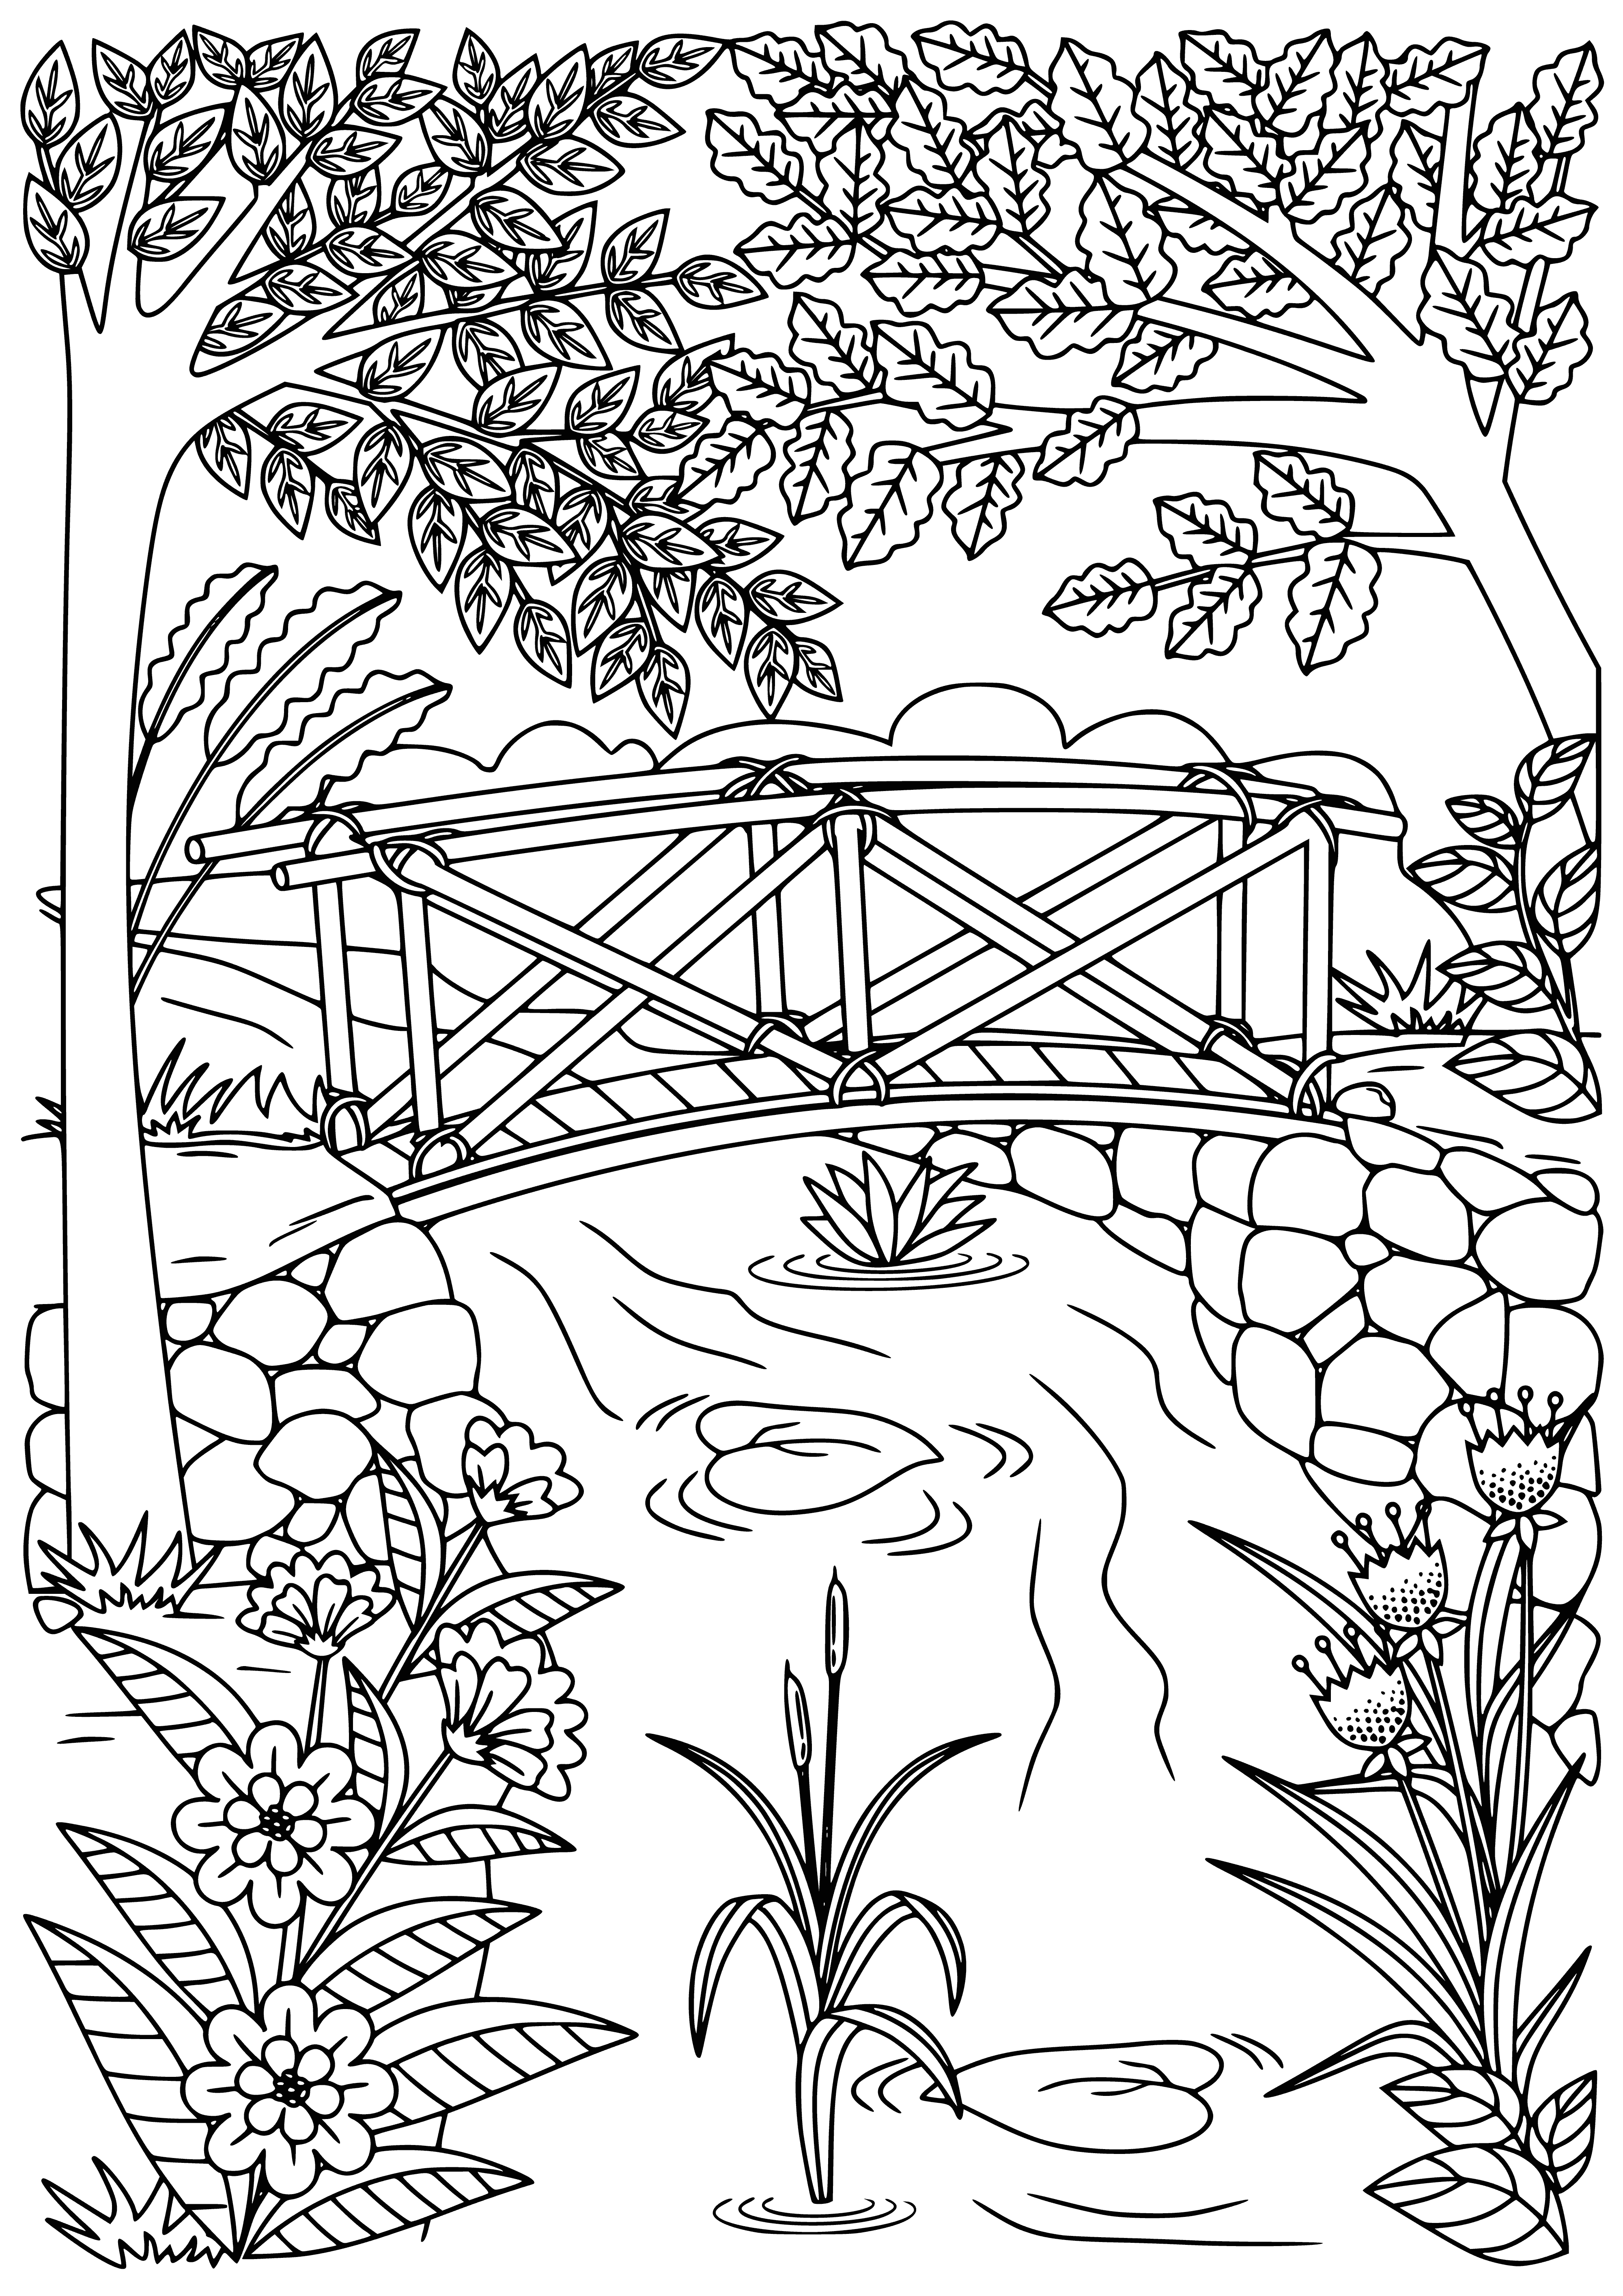 coloring page: A metal & concrete bridge spans a river, supported by pillars, letting traffic flow in both directions below its calm waters.